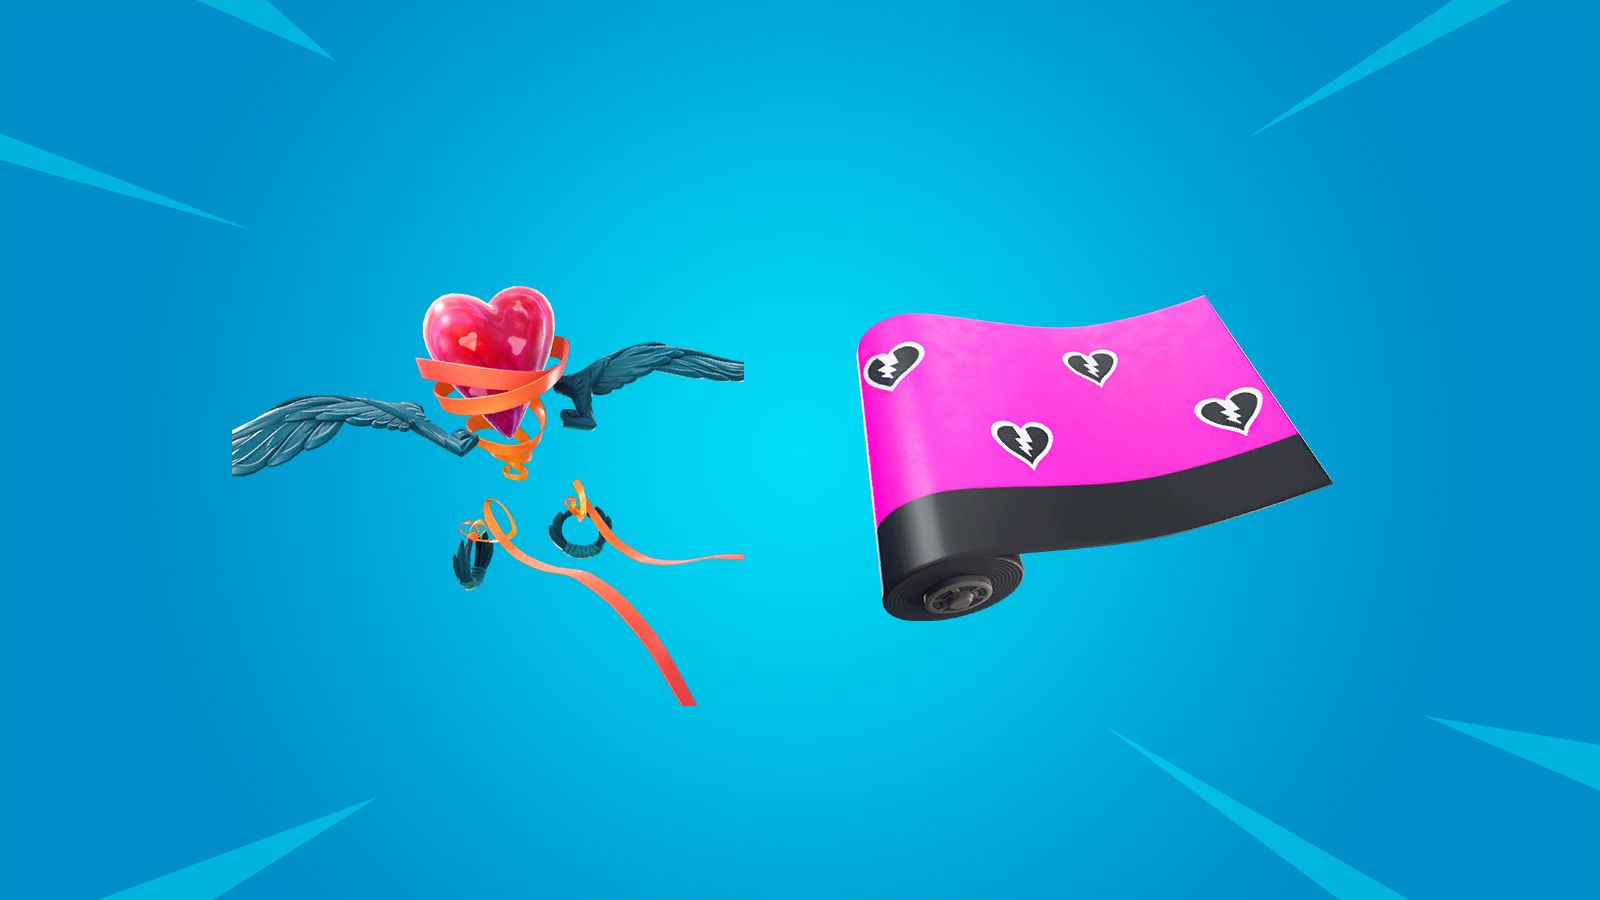 Fortnite: How to get the free Heartspan glider and Cuddle Hearts wrap